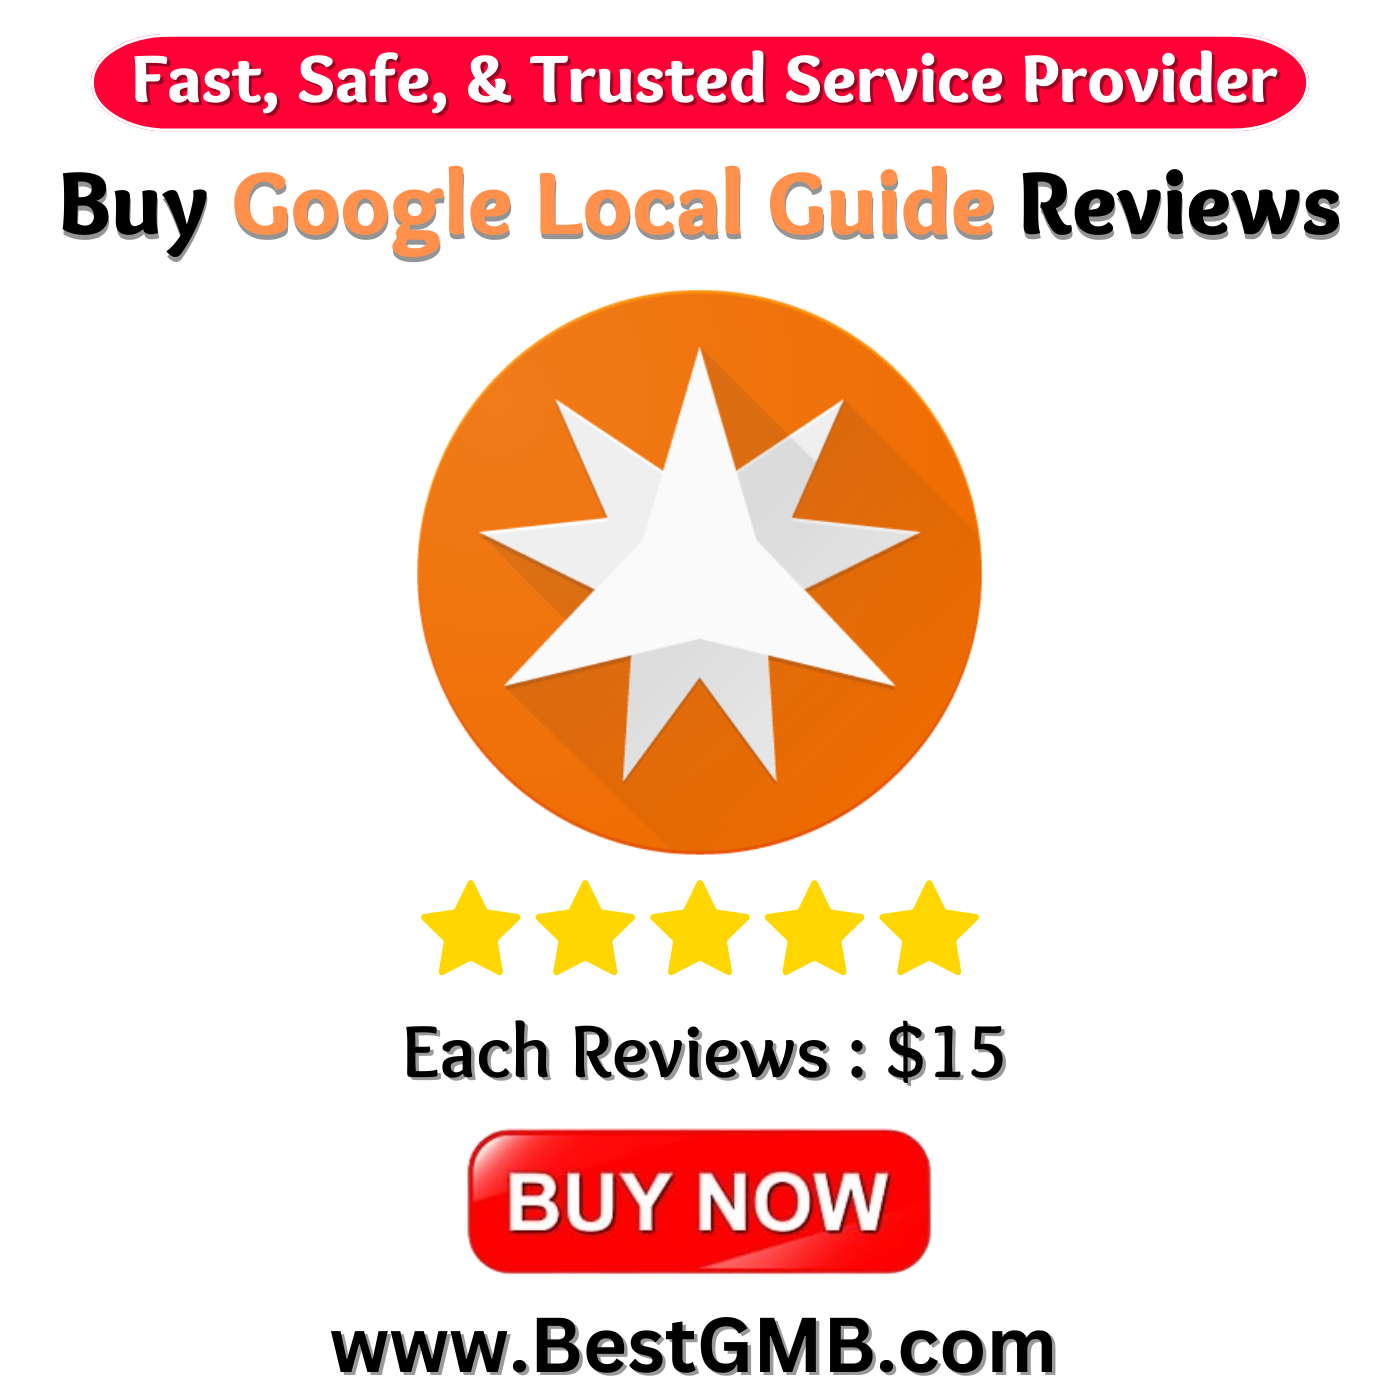 Buy Google Local Guide Reviews - Fast , Safe & Trusted